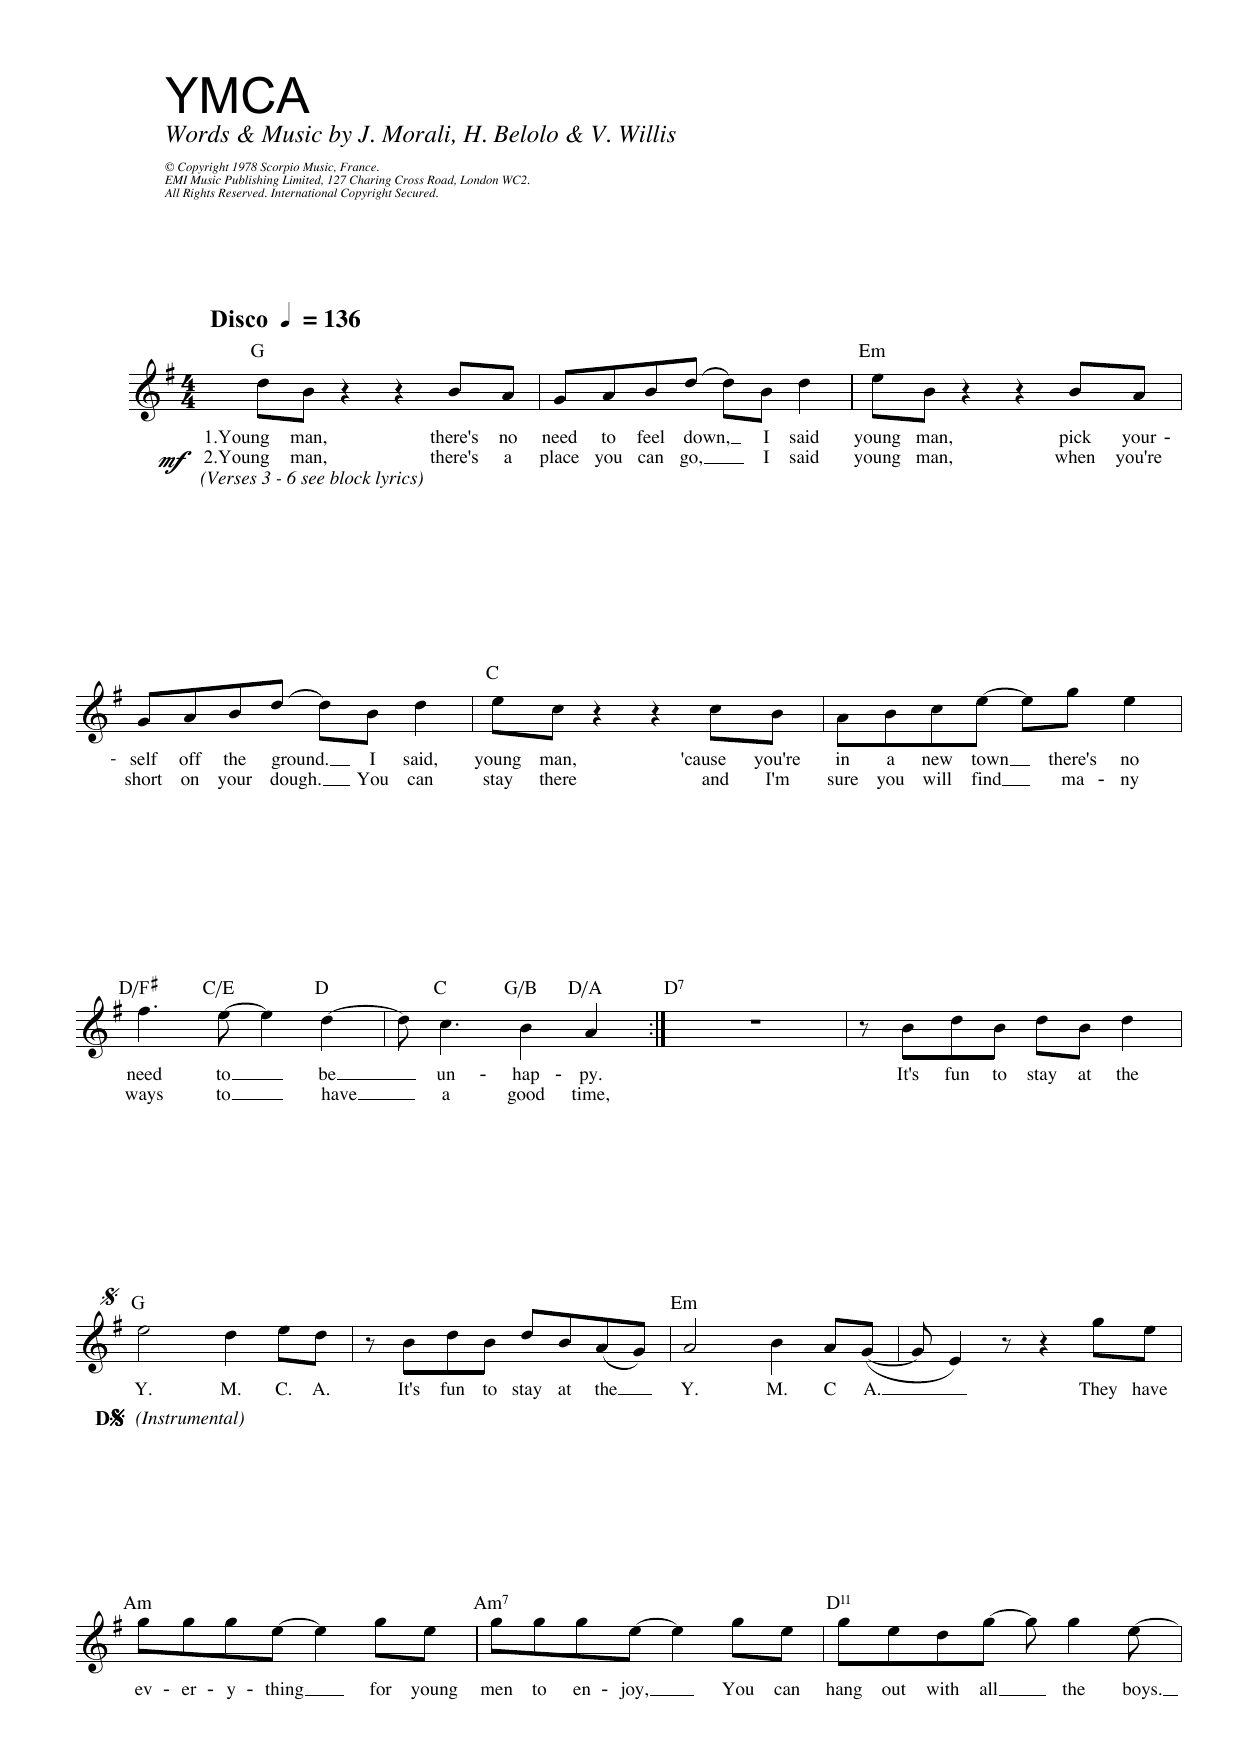 Village People Y.M.C.A. sheet music notes and chords. Download Printable PDF.